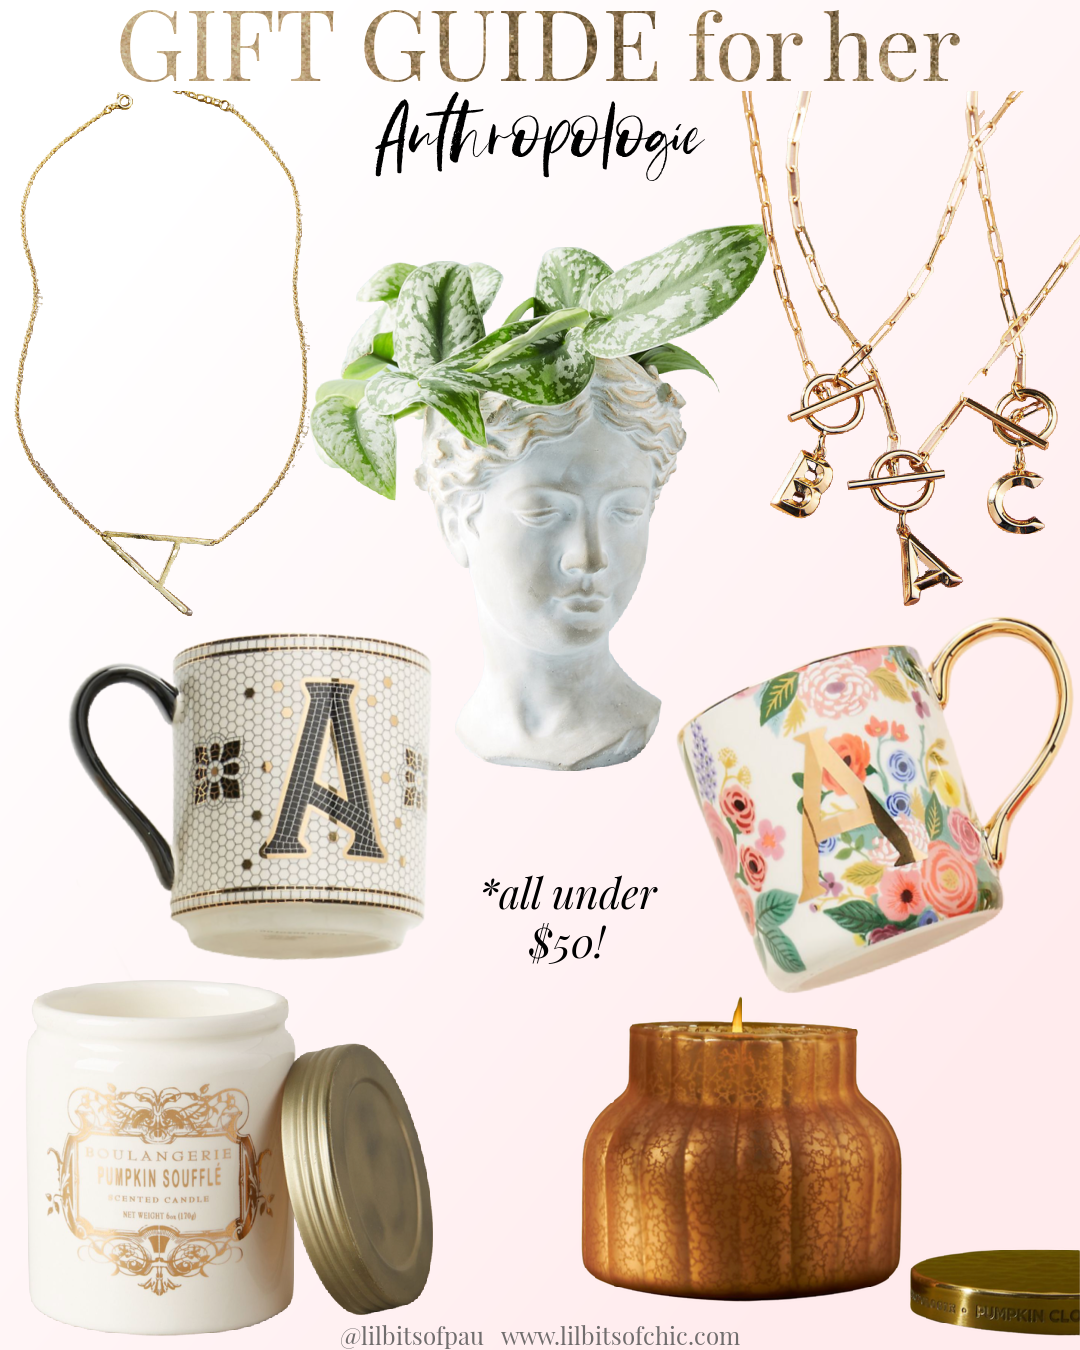 Gift Guide for her from Anthropologie